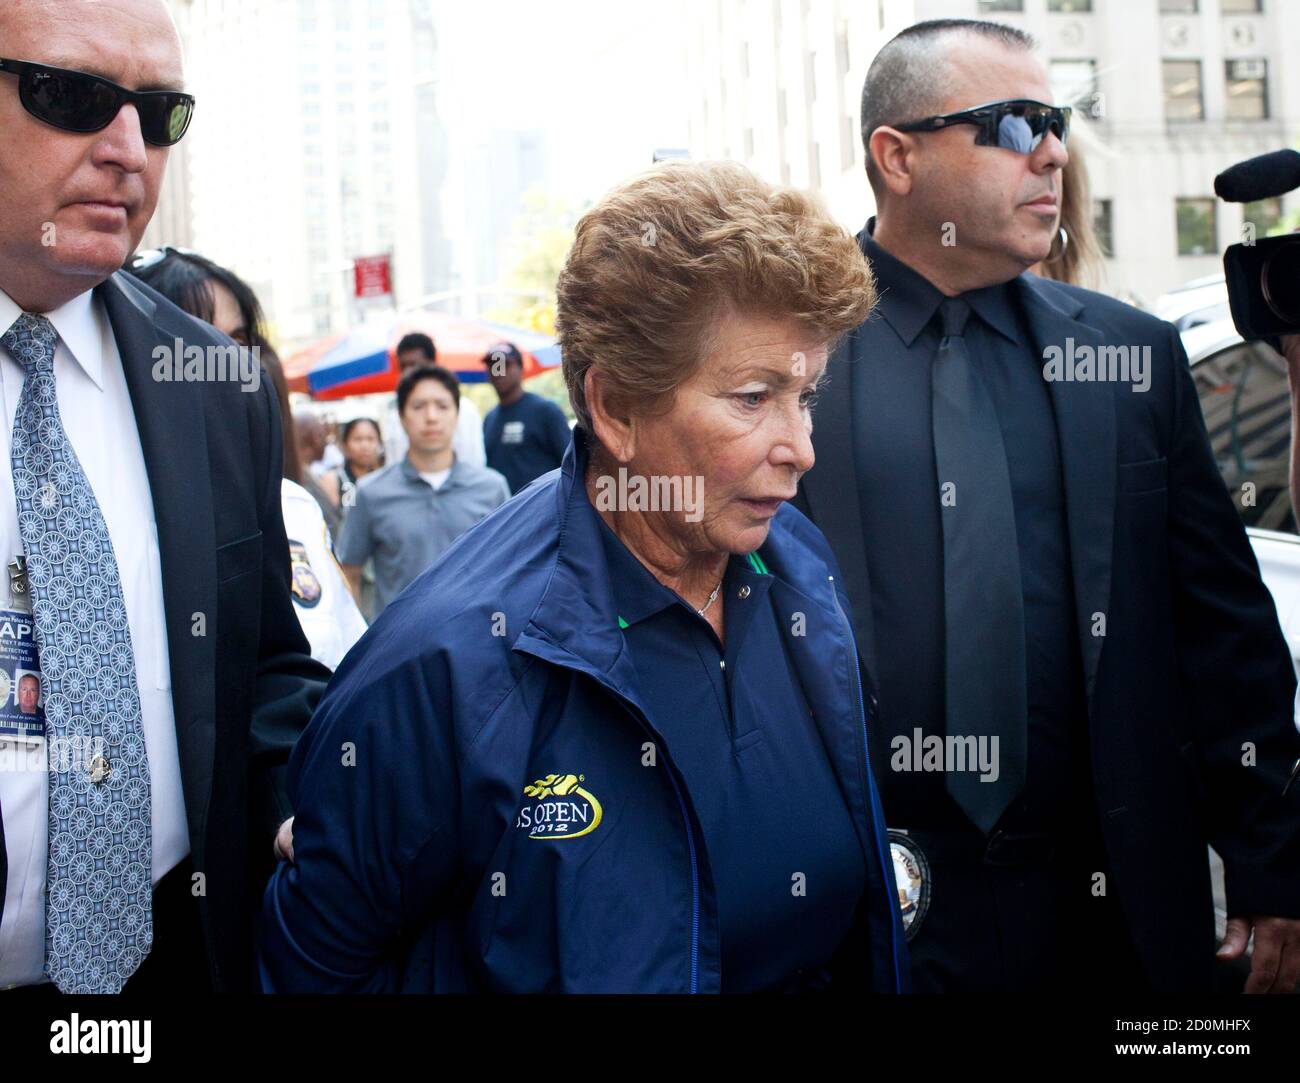 Lois Ann Goodman, 70, is led away from the Manhattan Criminal Court after  being extradited to California in the custody of Los Angeles Police  Department detectives in New York, August 23, 2012.